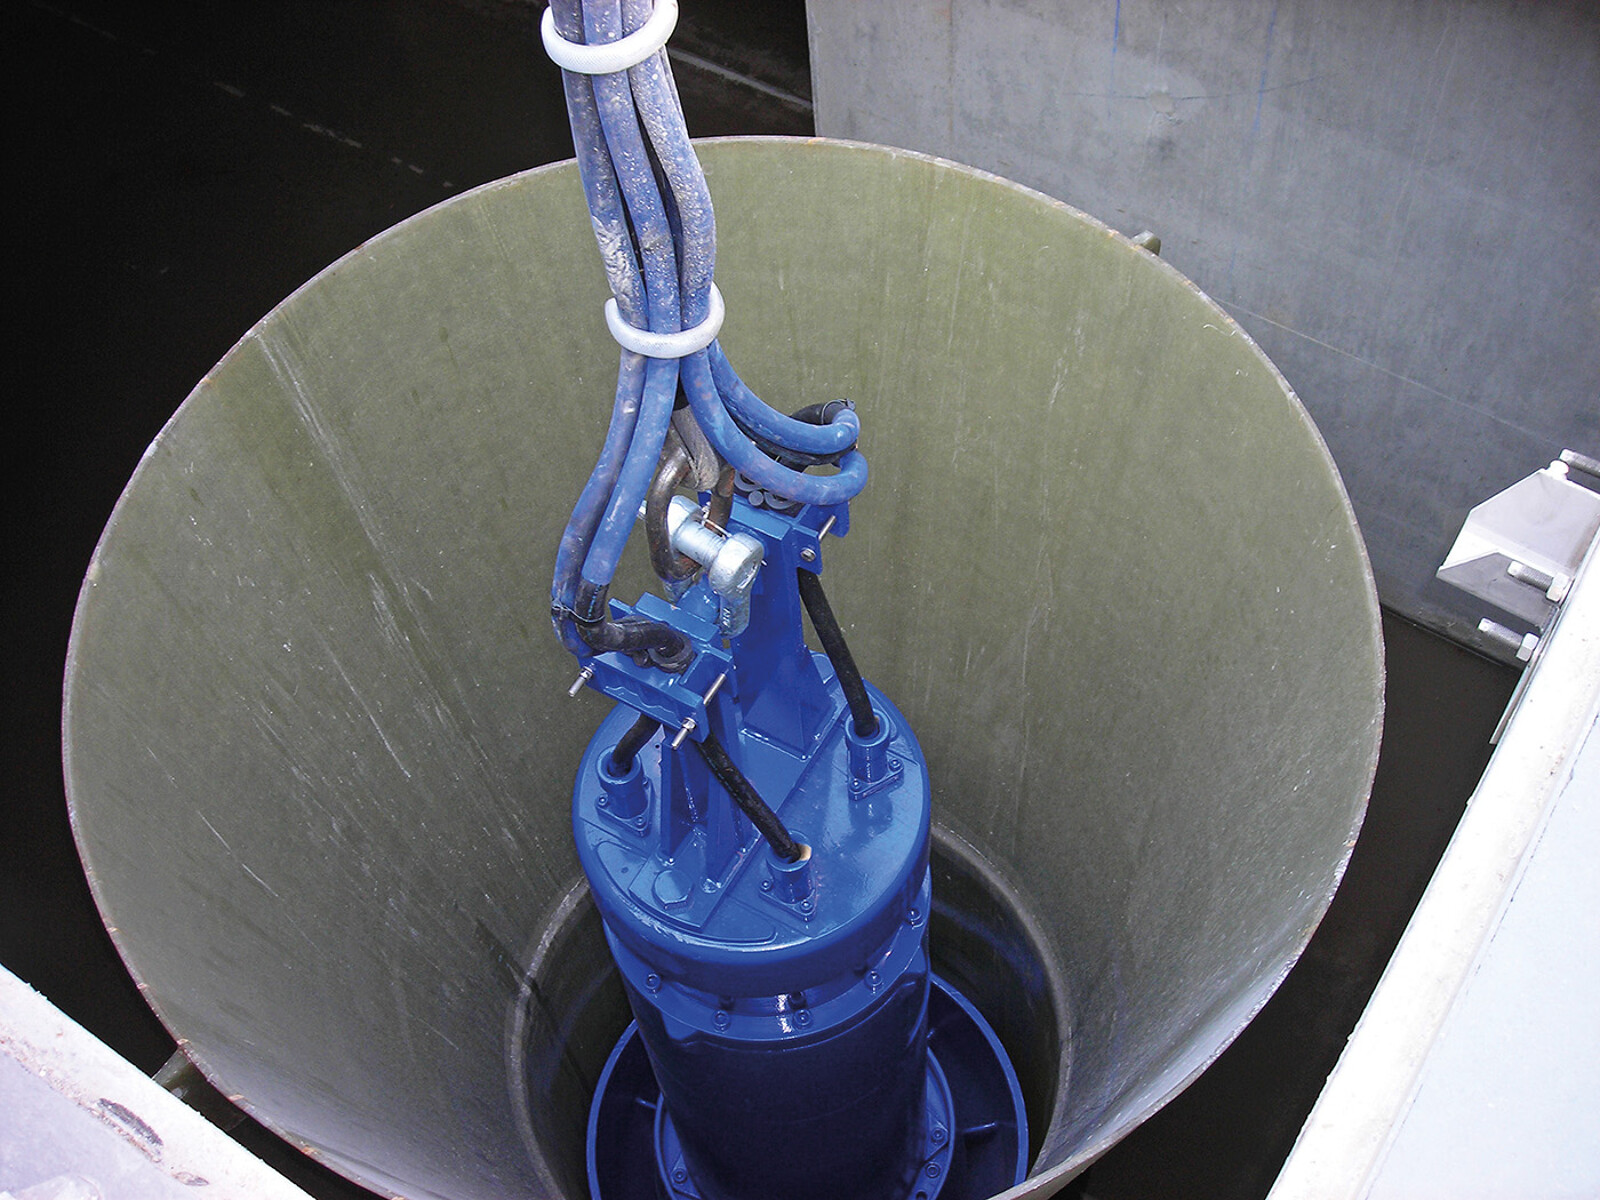 Lowering an Amacan into the discharge tube